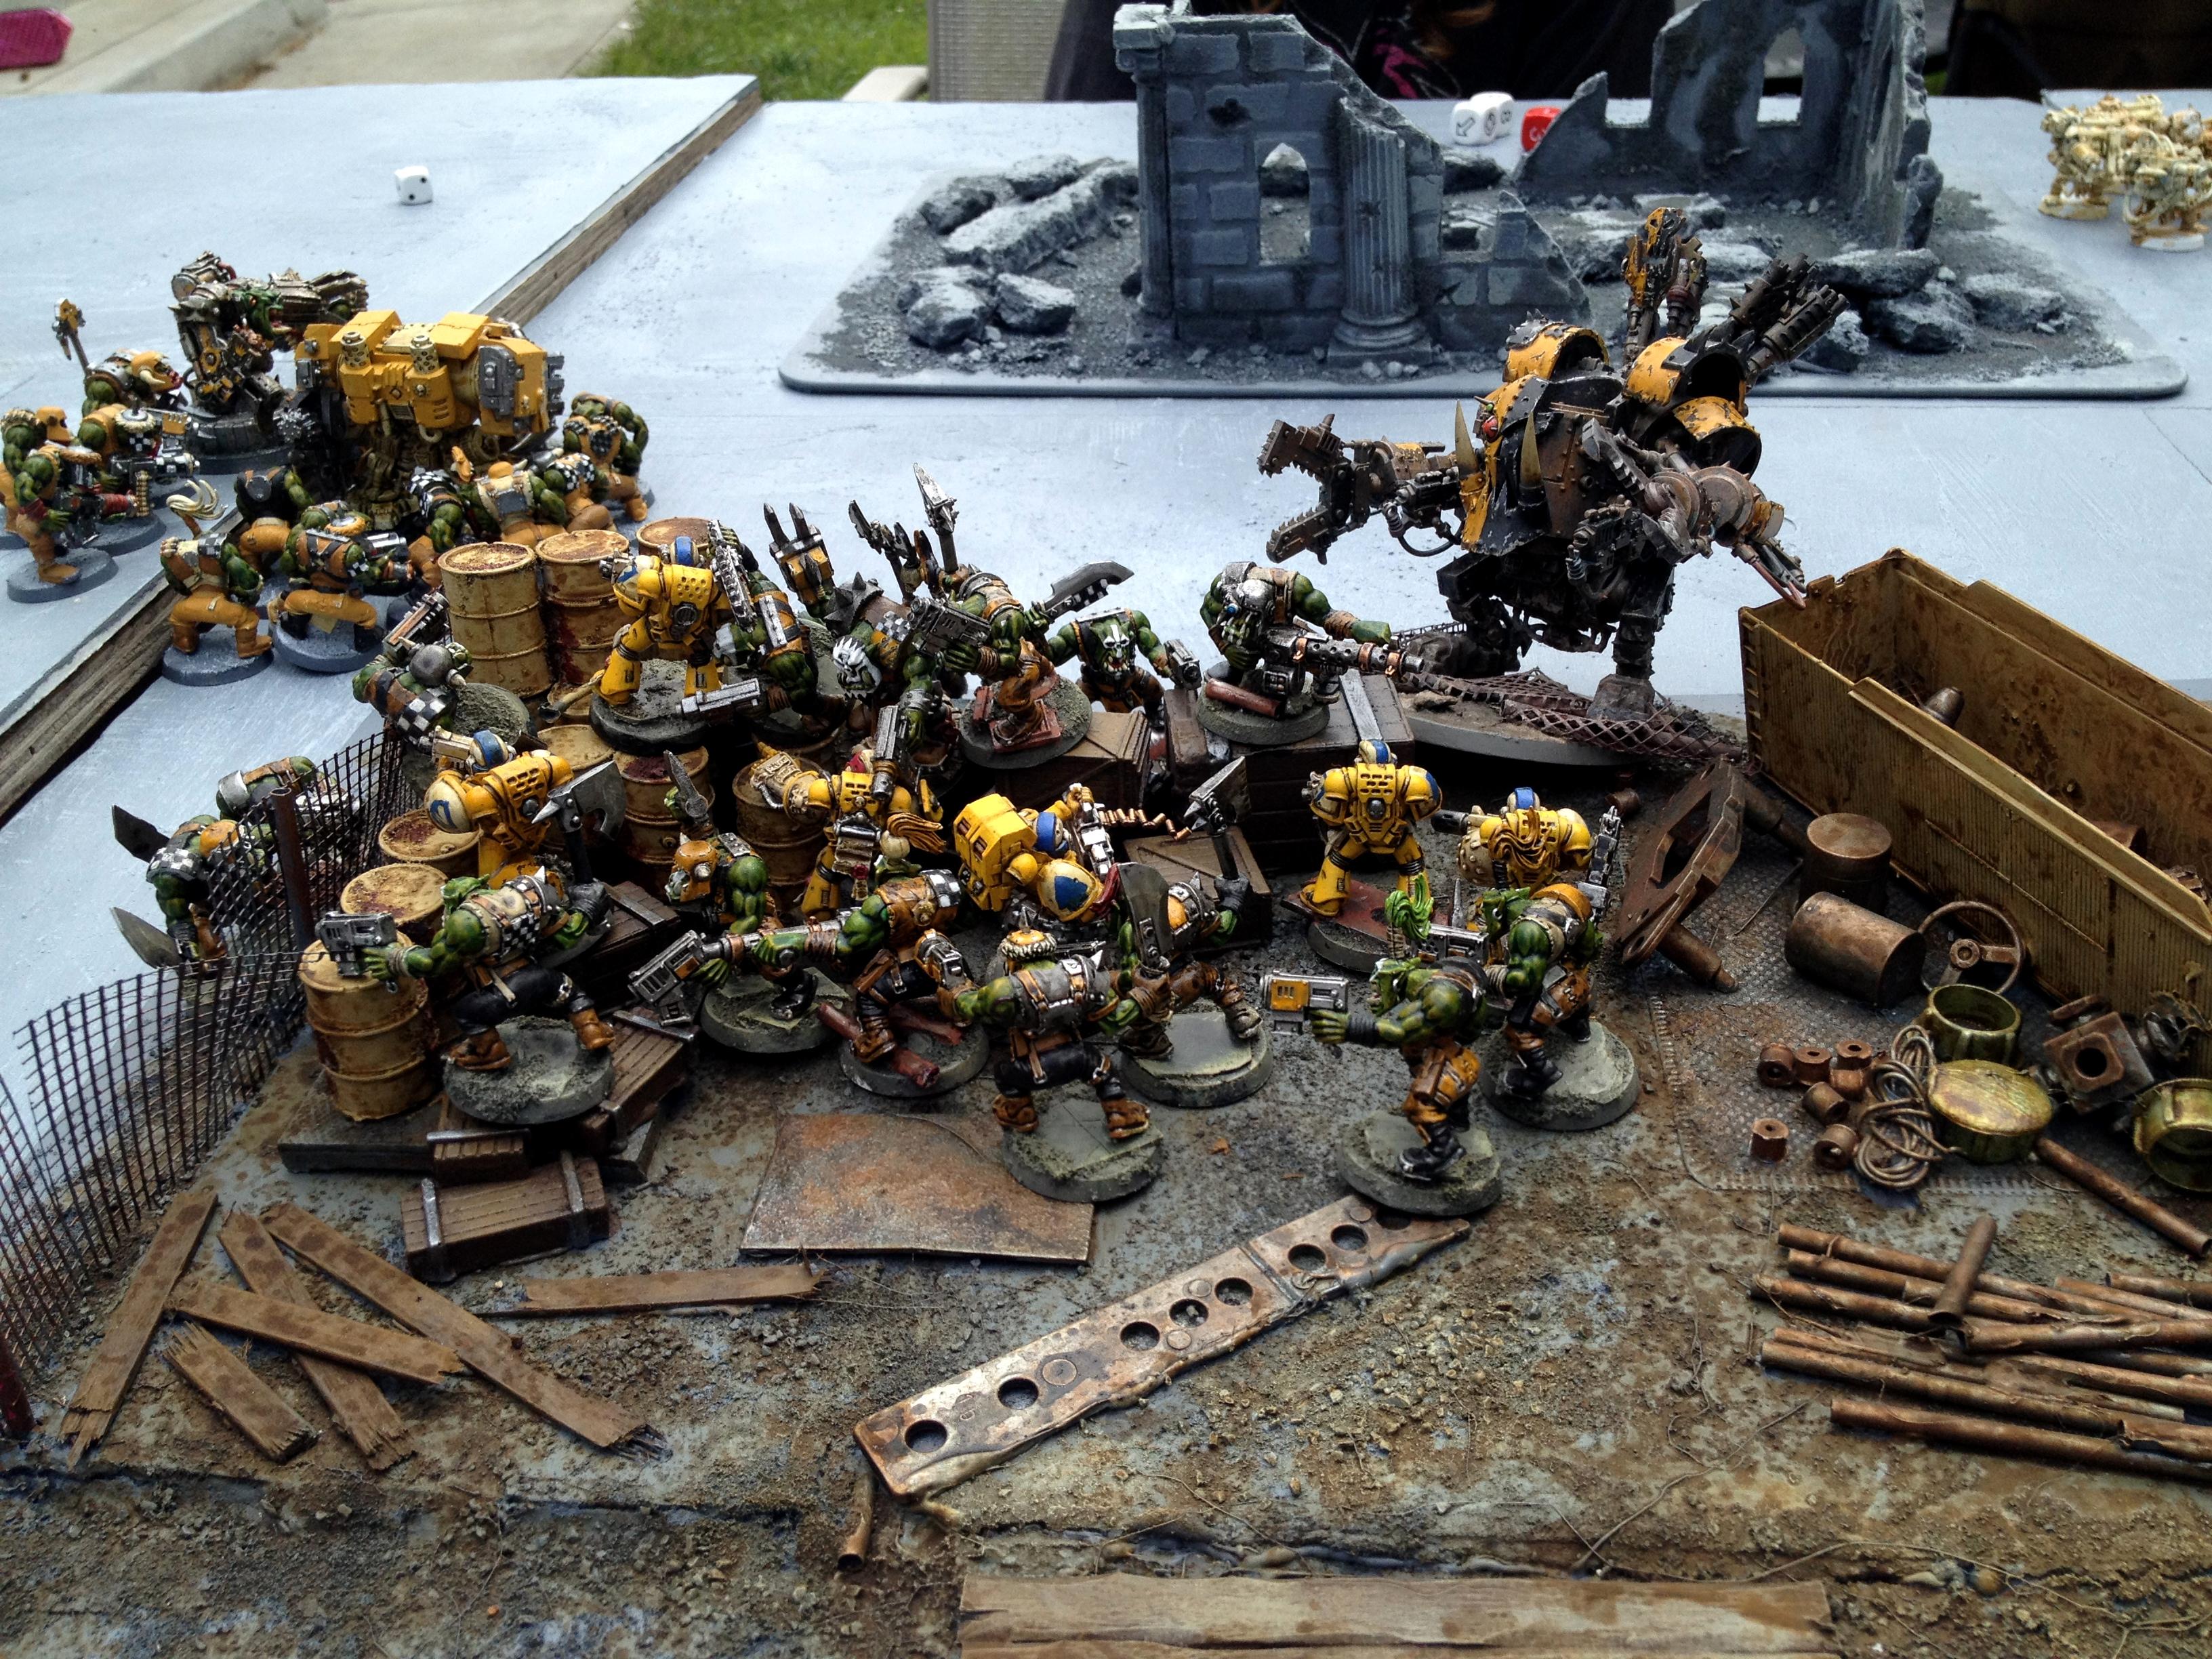 Dreadnought, Ork Dreadnaught, Orks, Space Marines